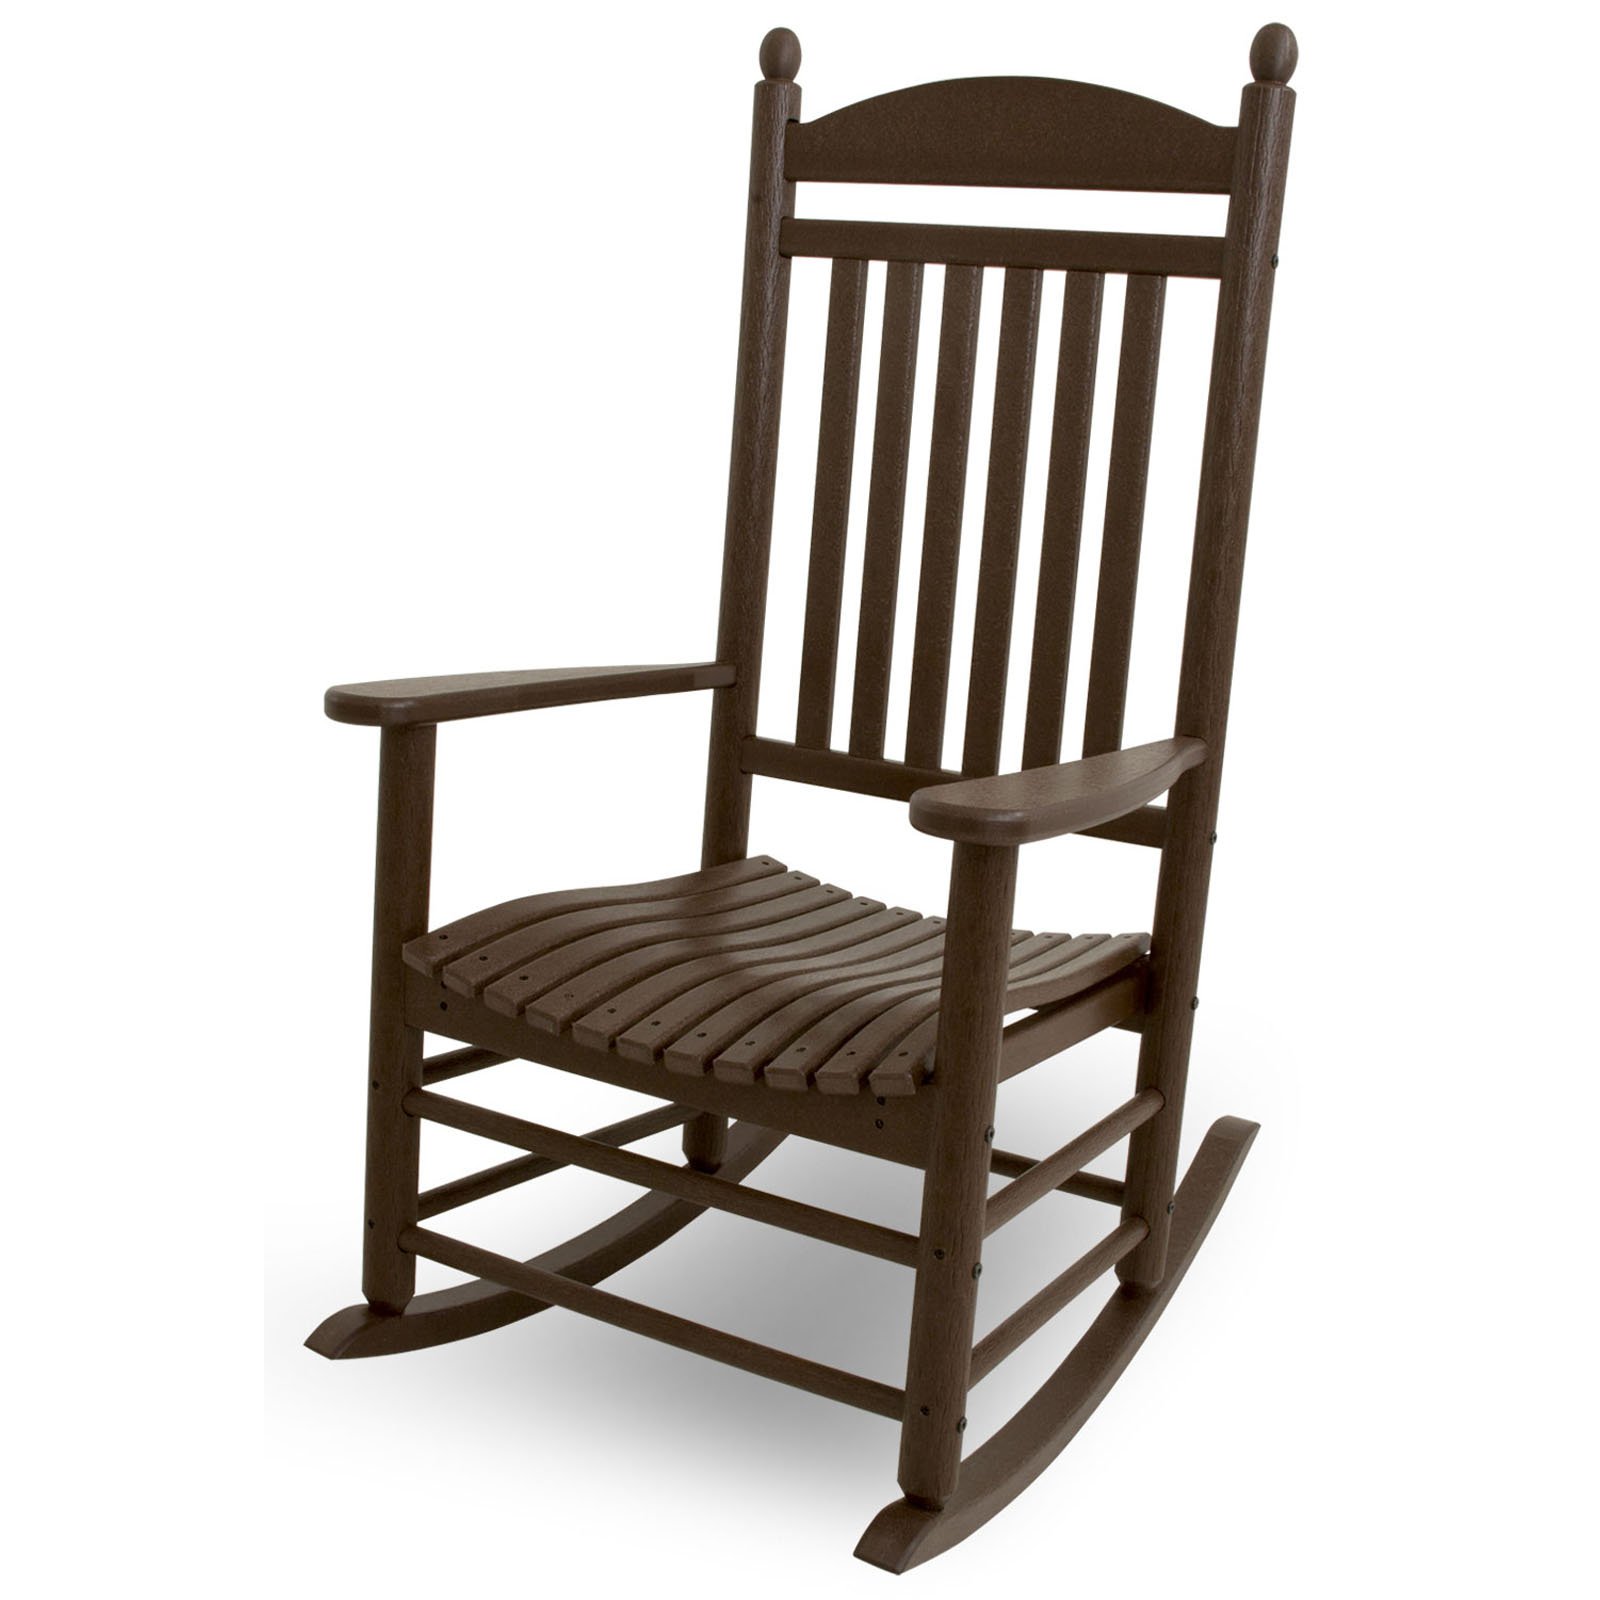 Cracker Barrel Rocking Chairs Replacement Parts - energybrooklyn